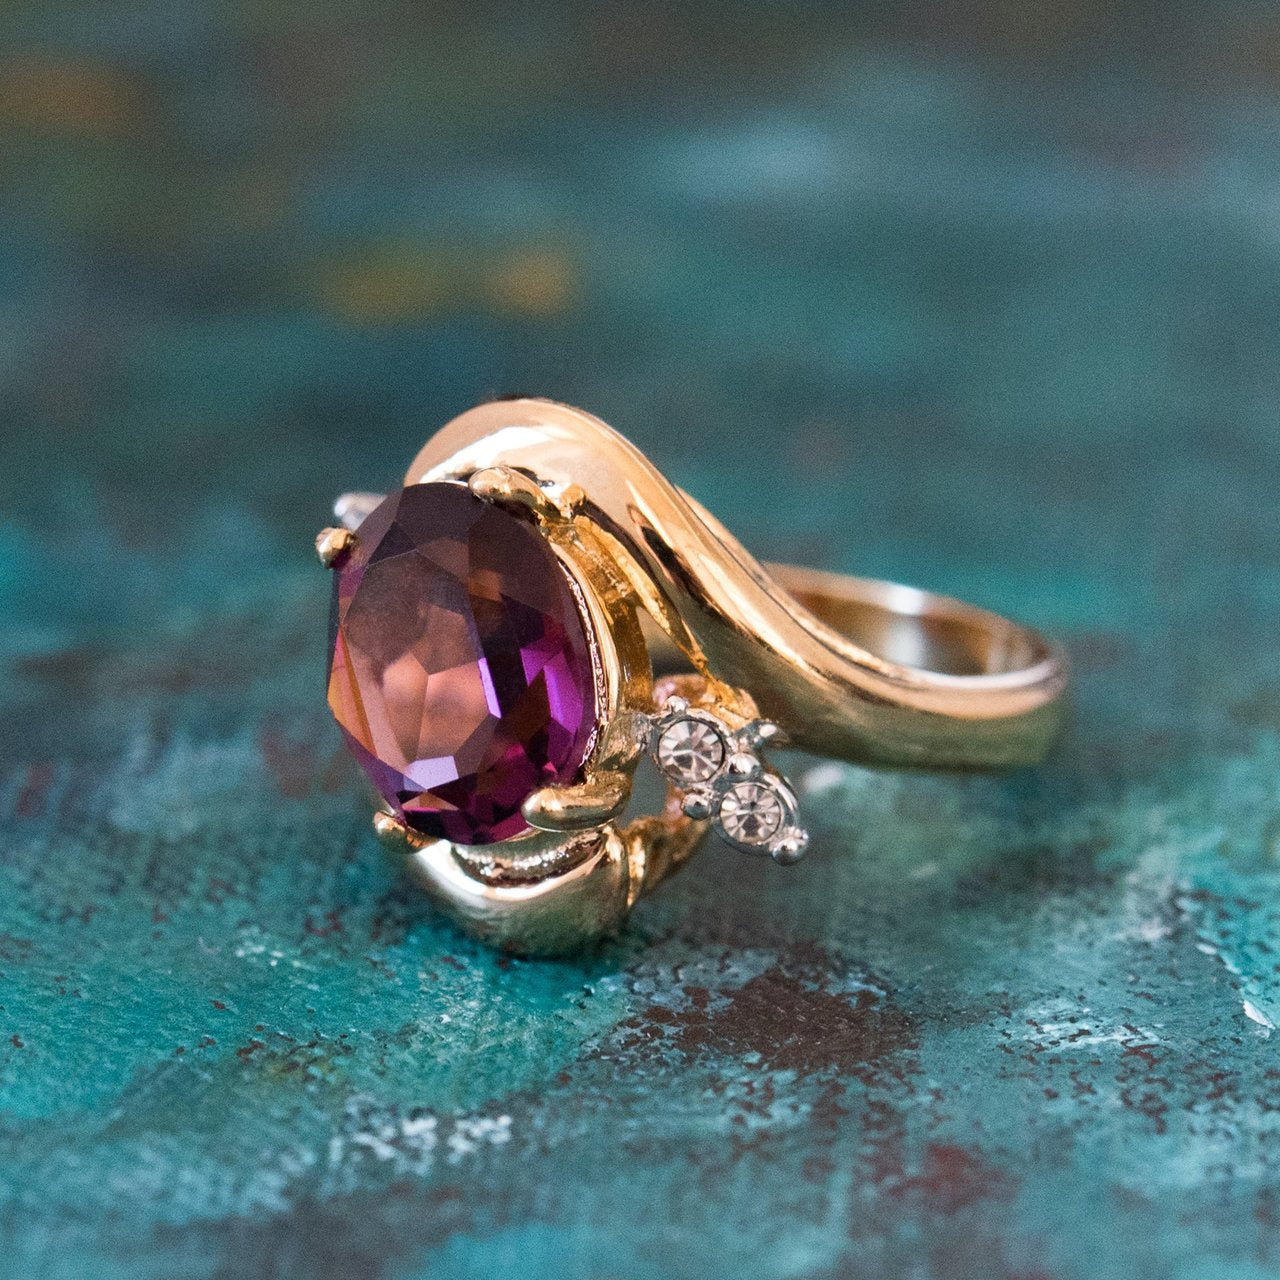 Vintage Ring Amethyst and Clear Swarovski Crystals 18kt Gold Antique Womans Jewelry #R2928